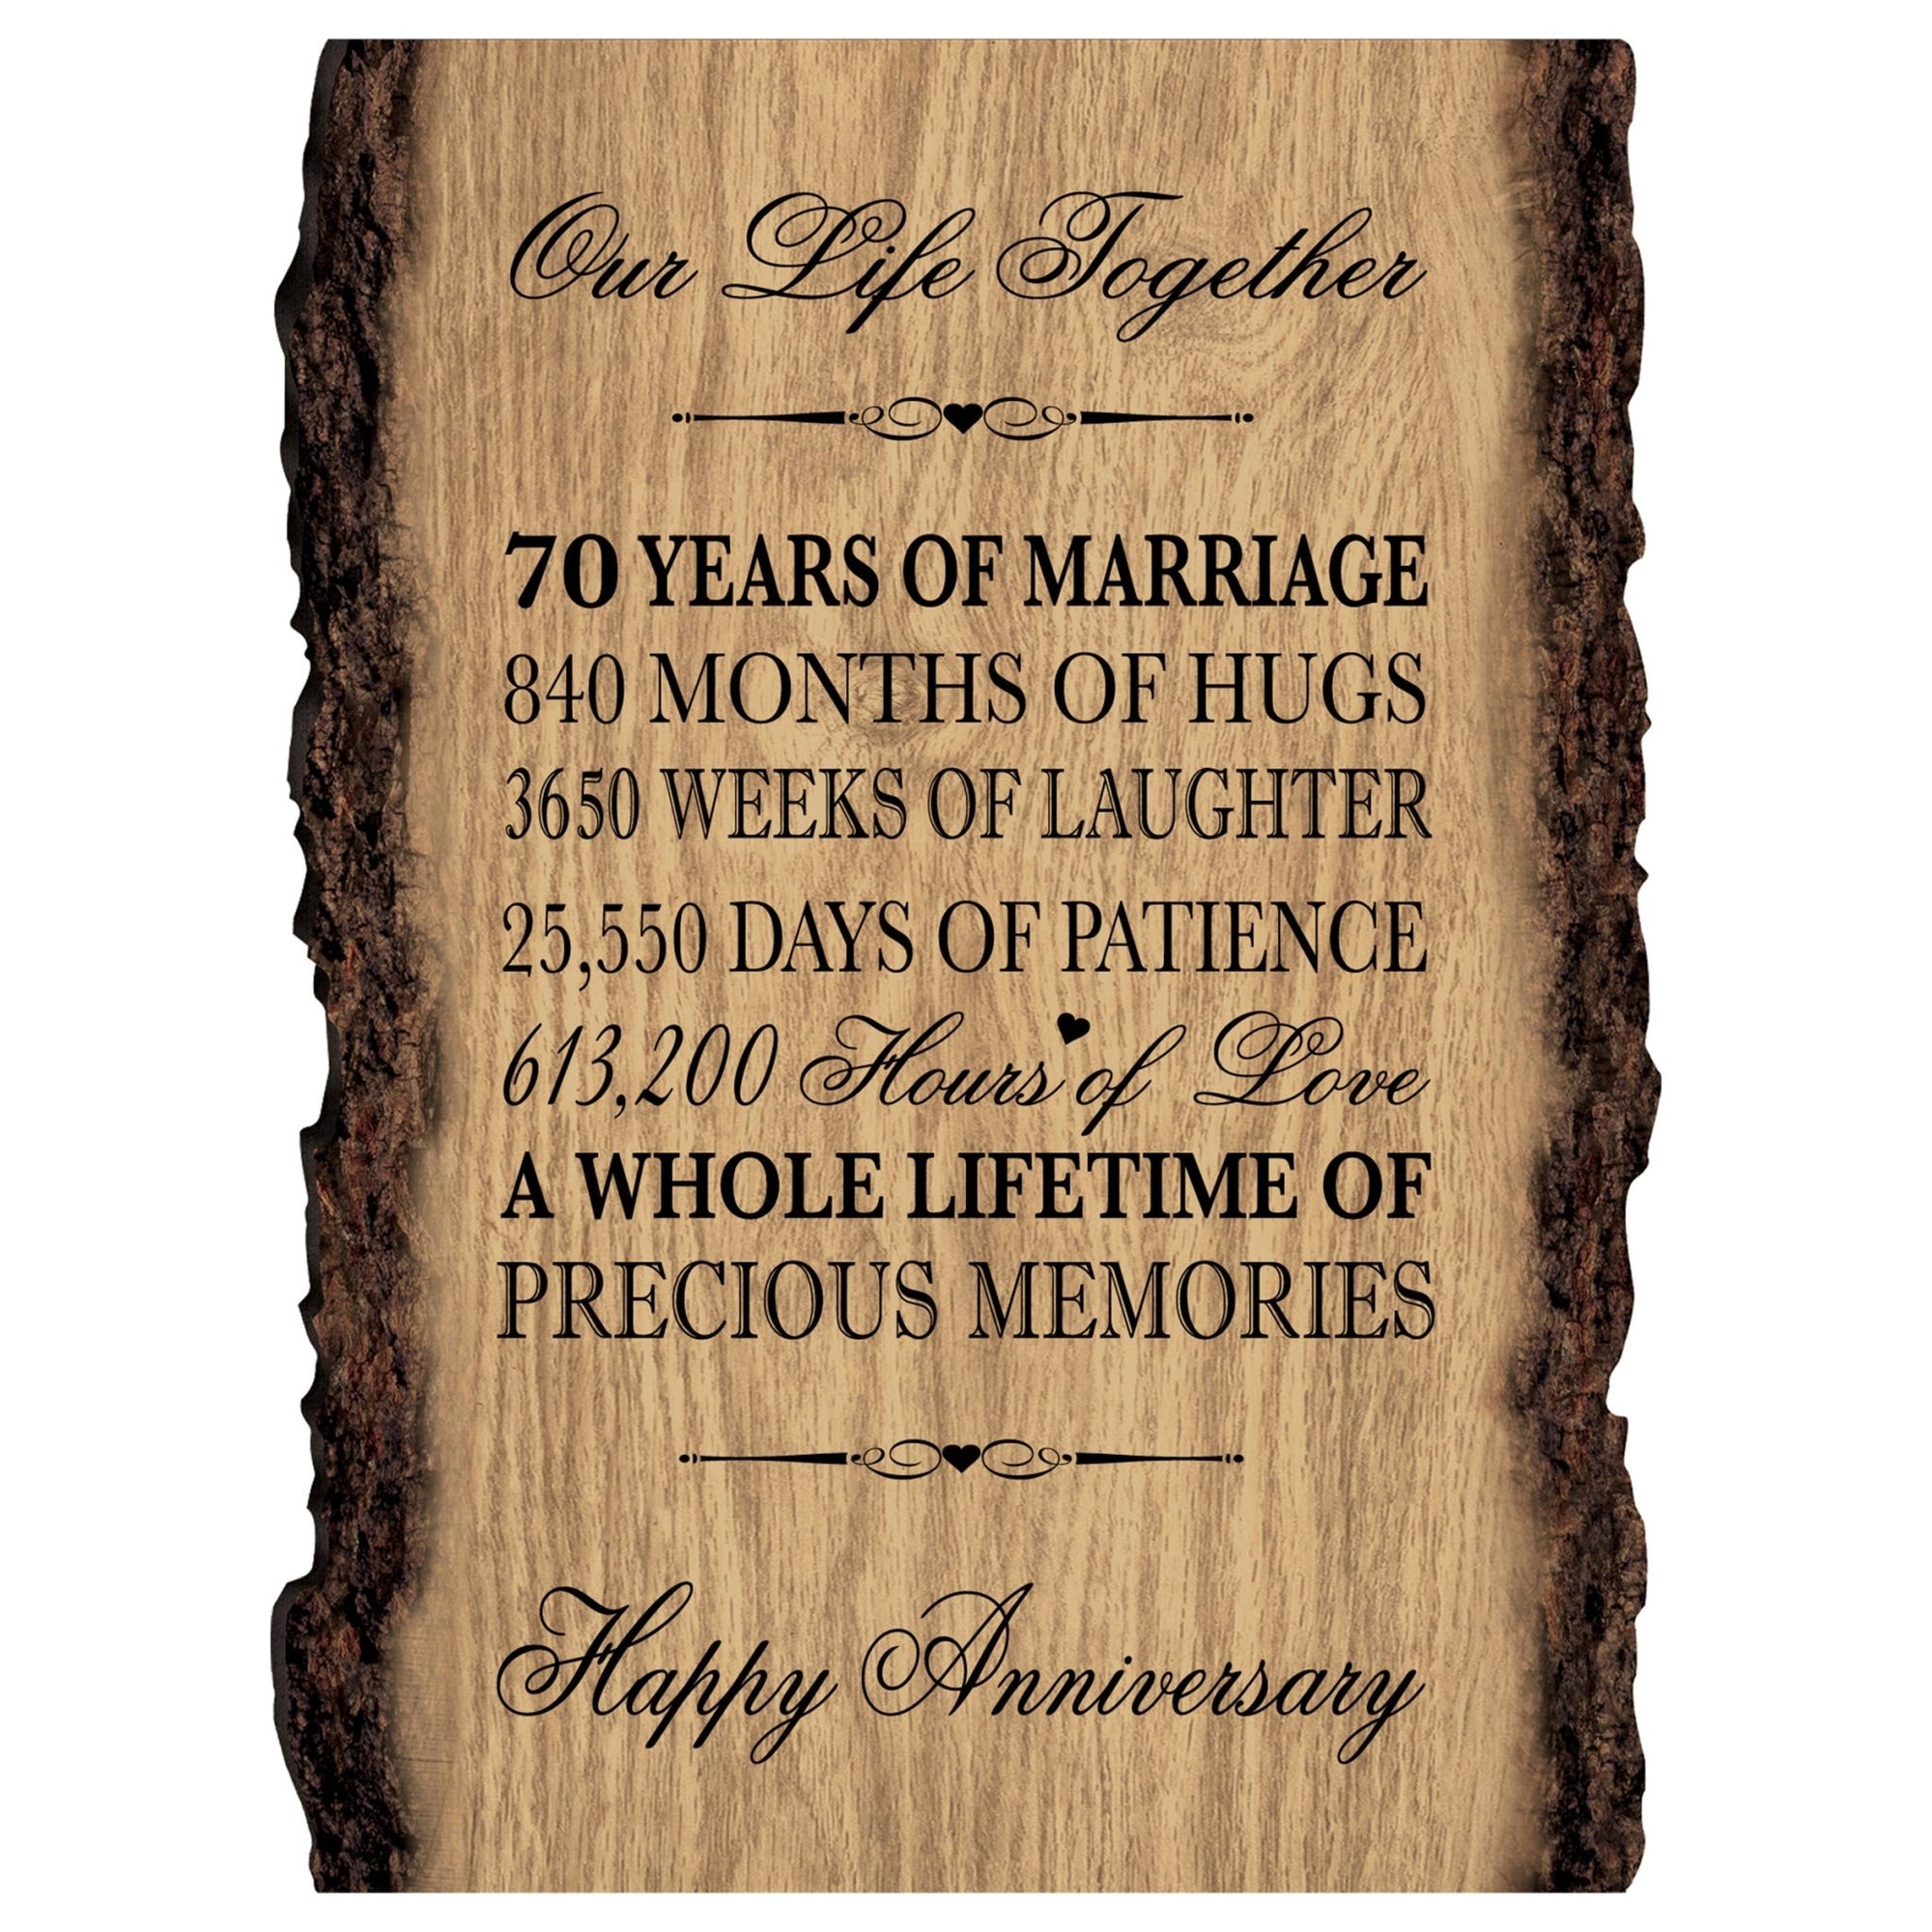 Rustic Wedding Anniversary 9x12 Barky Wall Plaque Gift For Parents, Grandparents New Couple - 70 Years Of Marriage - LifeSong Milestones